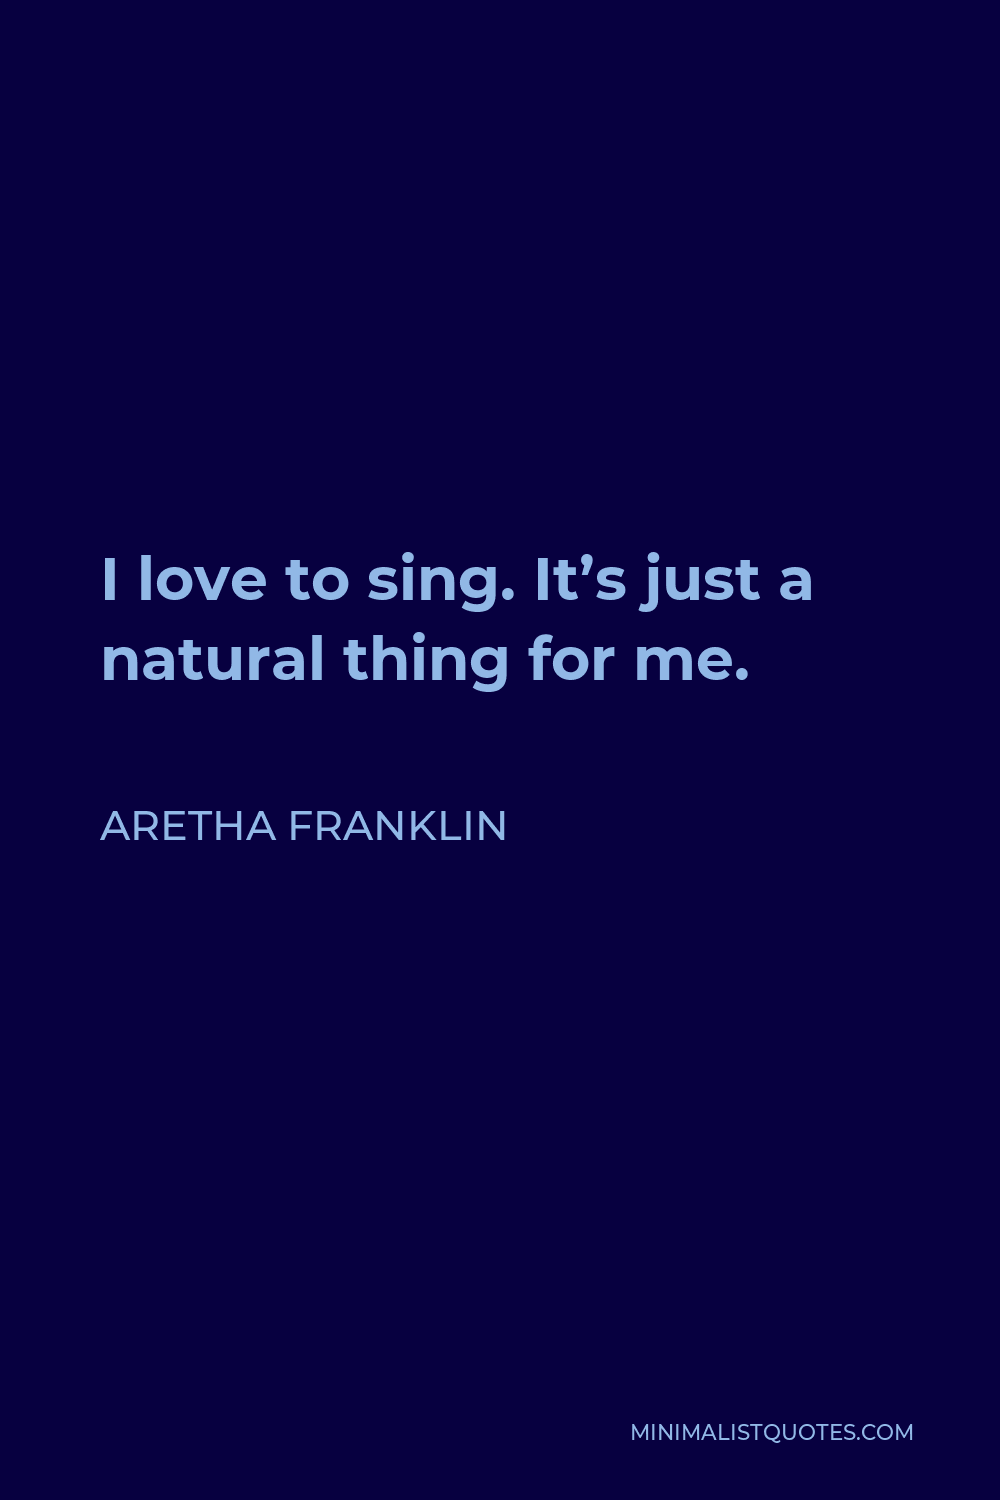 Aretha Franklin Quote - I love to sing. It’s just a natural thing for me.